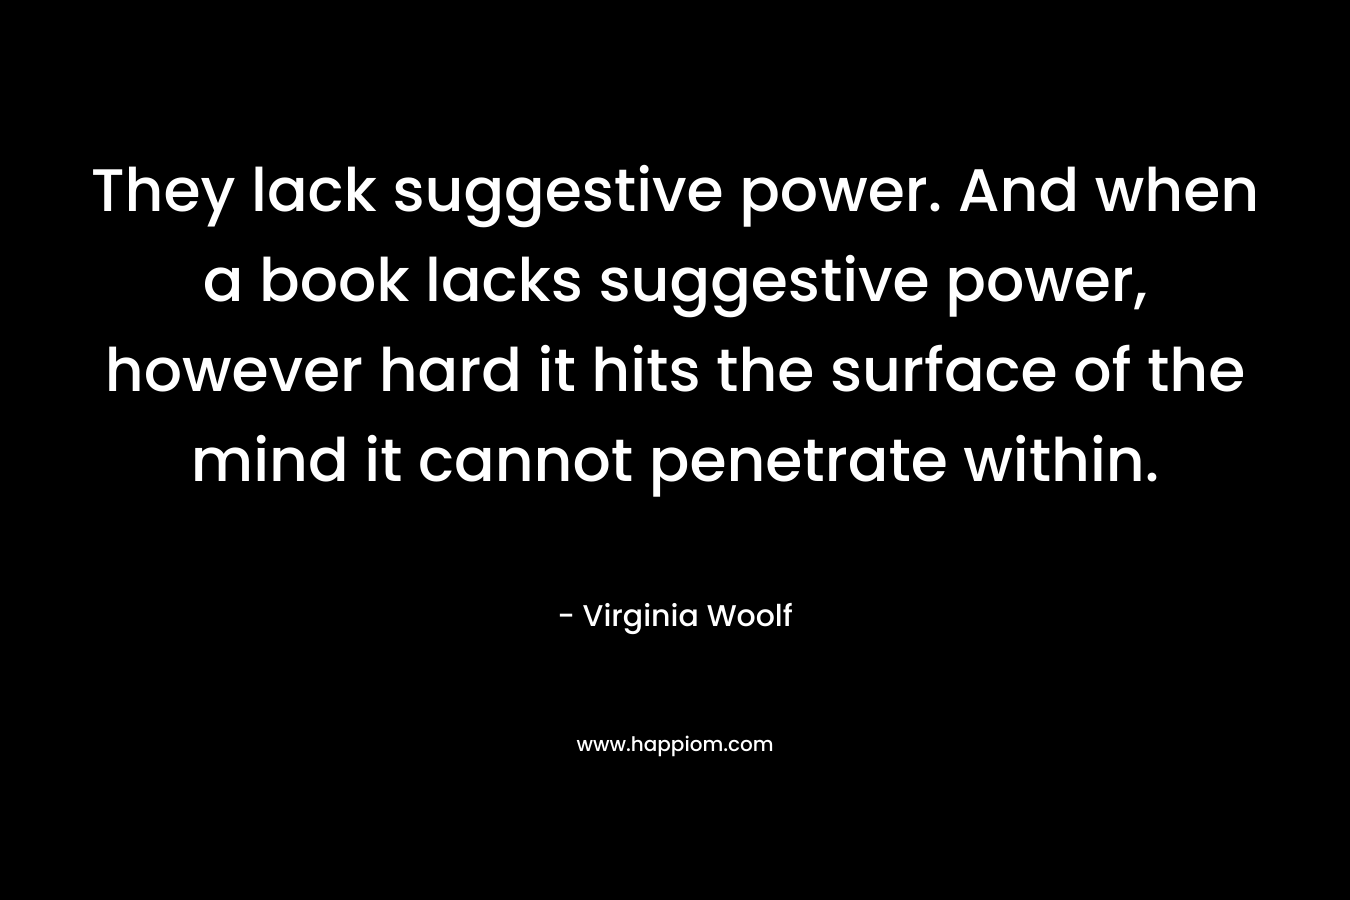 They lack suggestive power. And when a book lacks suggestive power, however hard it hits the surface of the mind it cannot penetrate within.